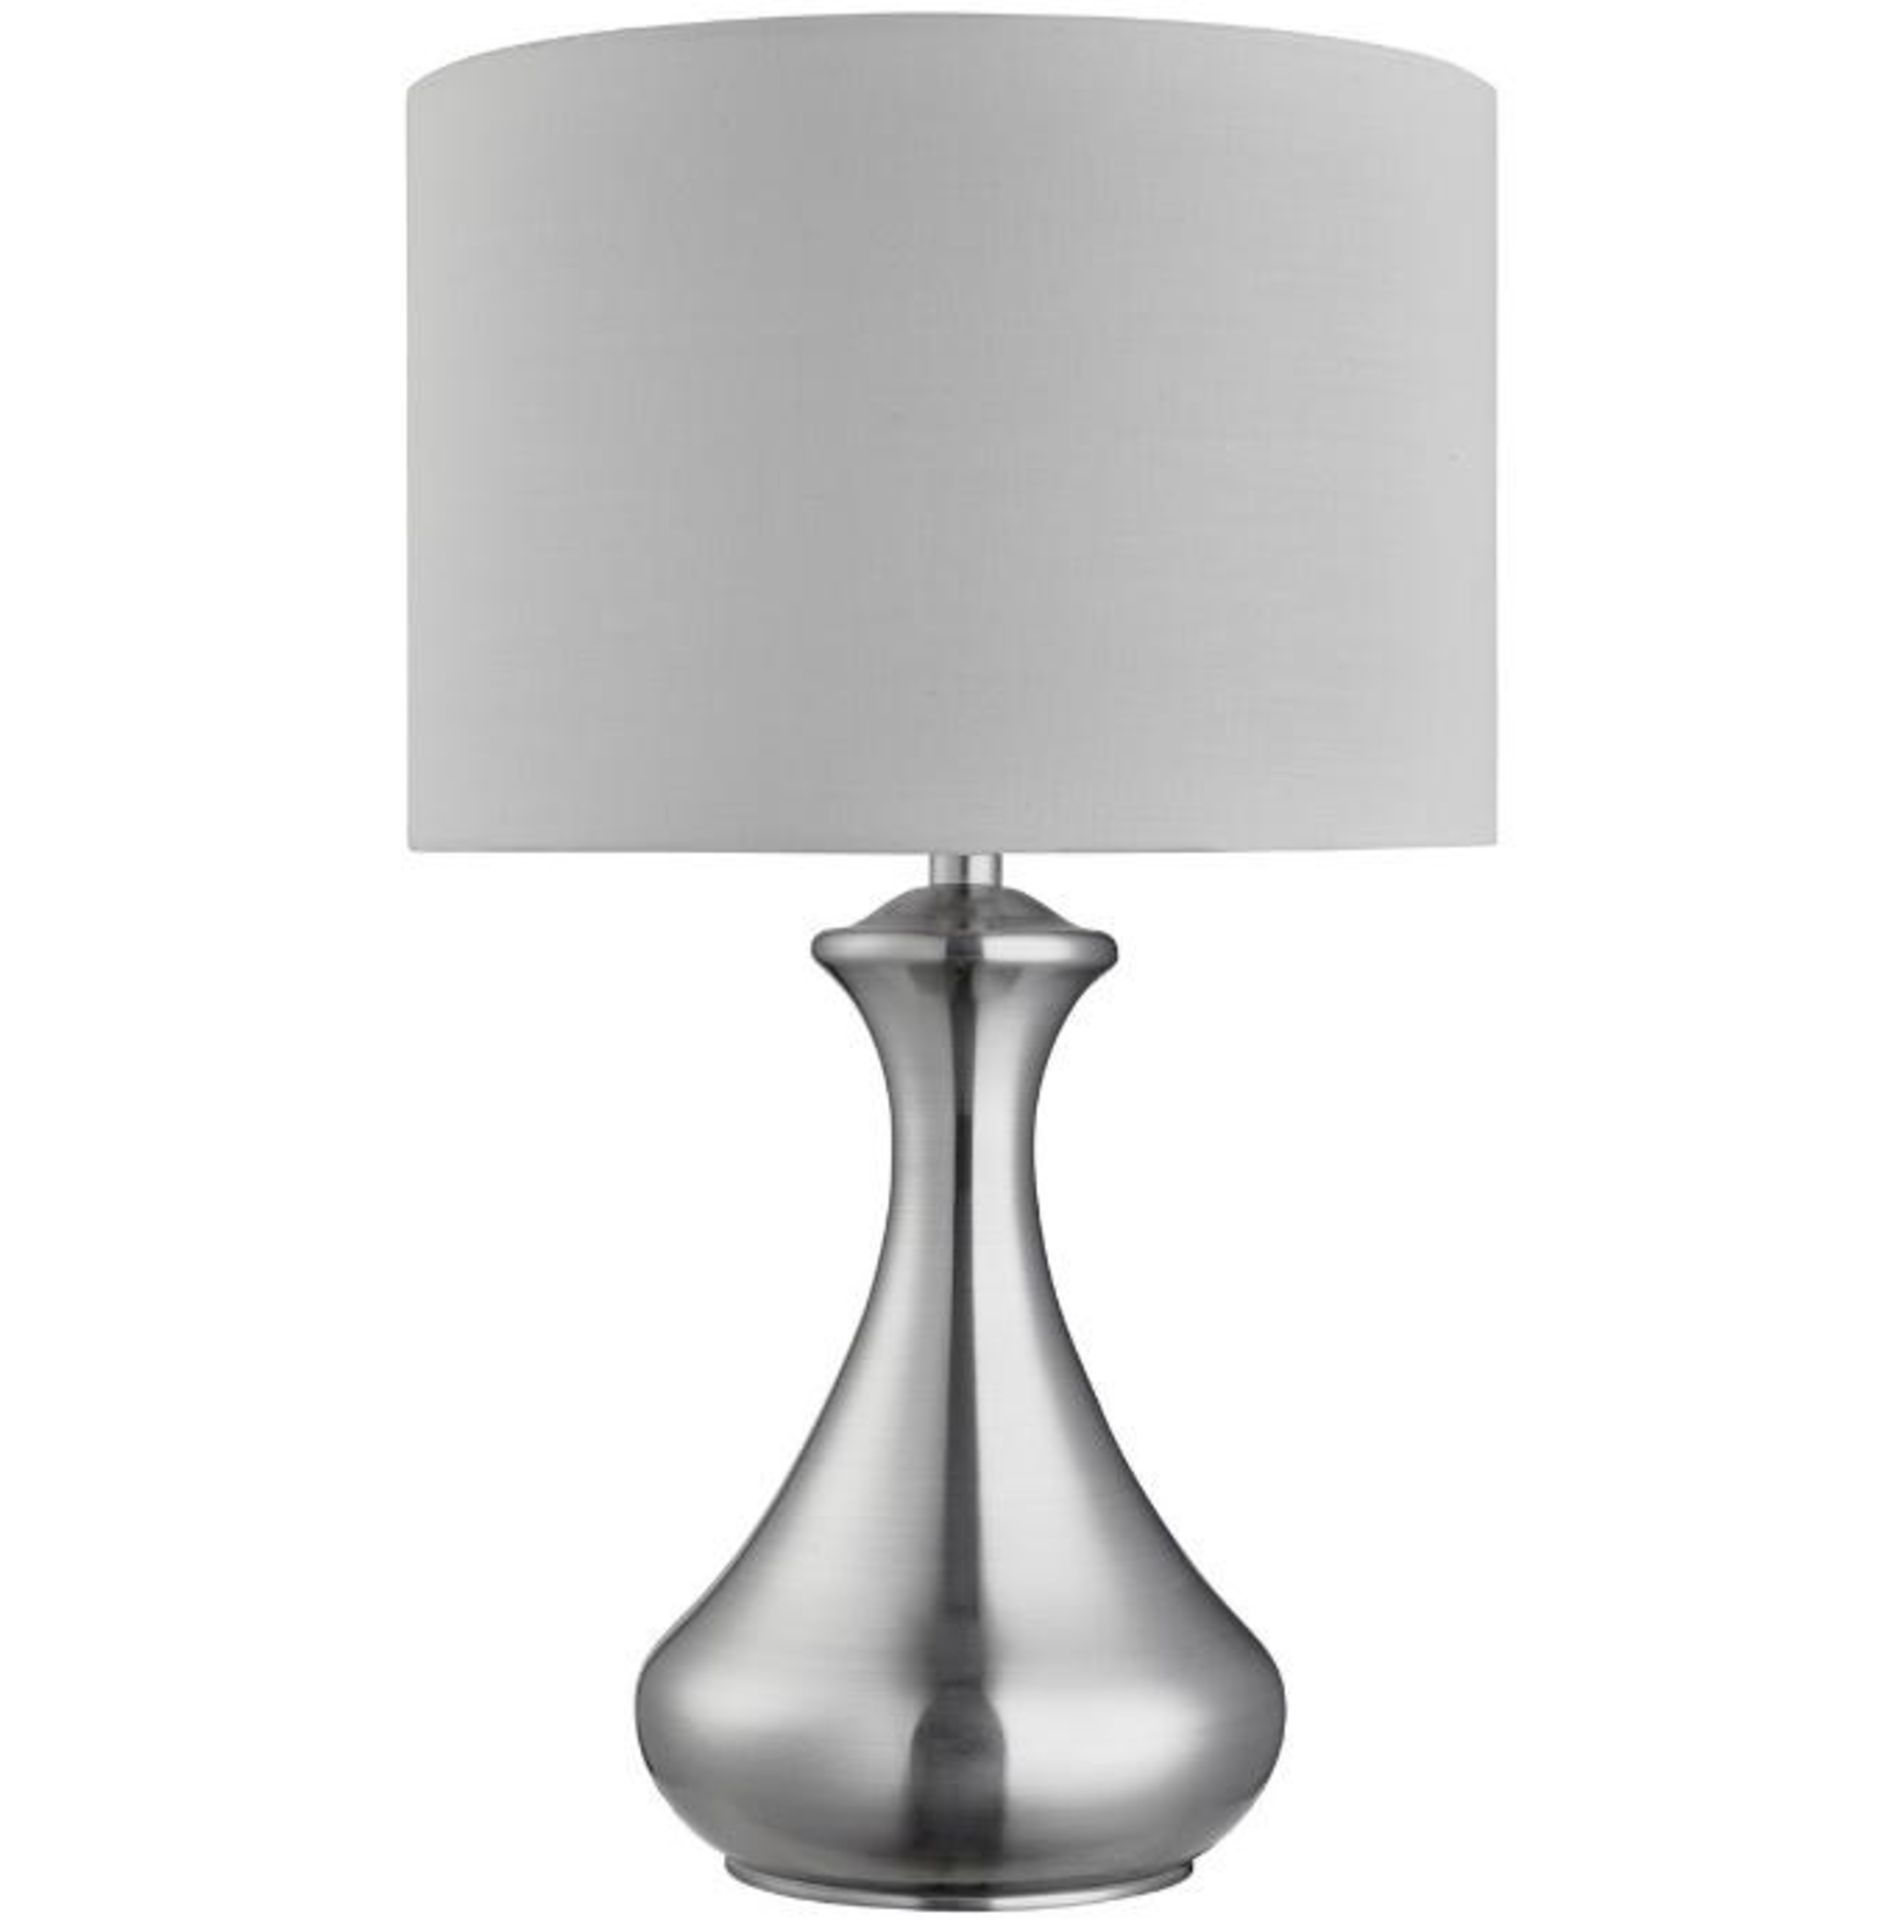 1 x Satin Silver Touch Table Lamp With White Fabric Shade - Ex Display Stock - CL323 - Ref: 2750SS/P